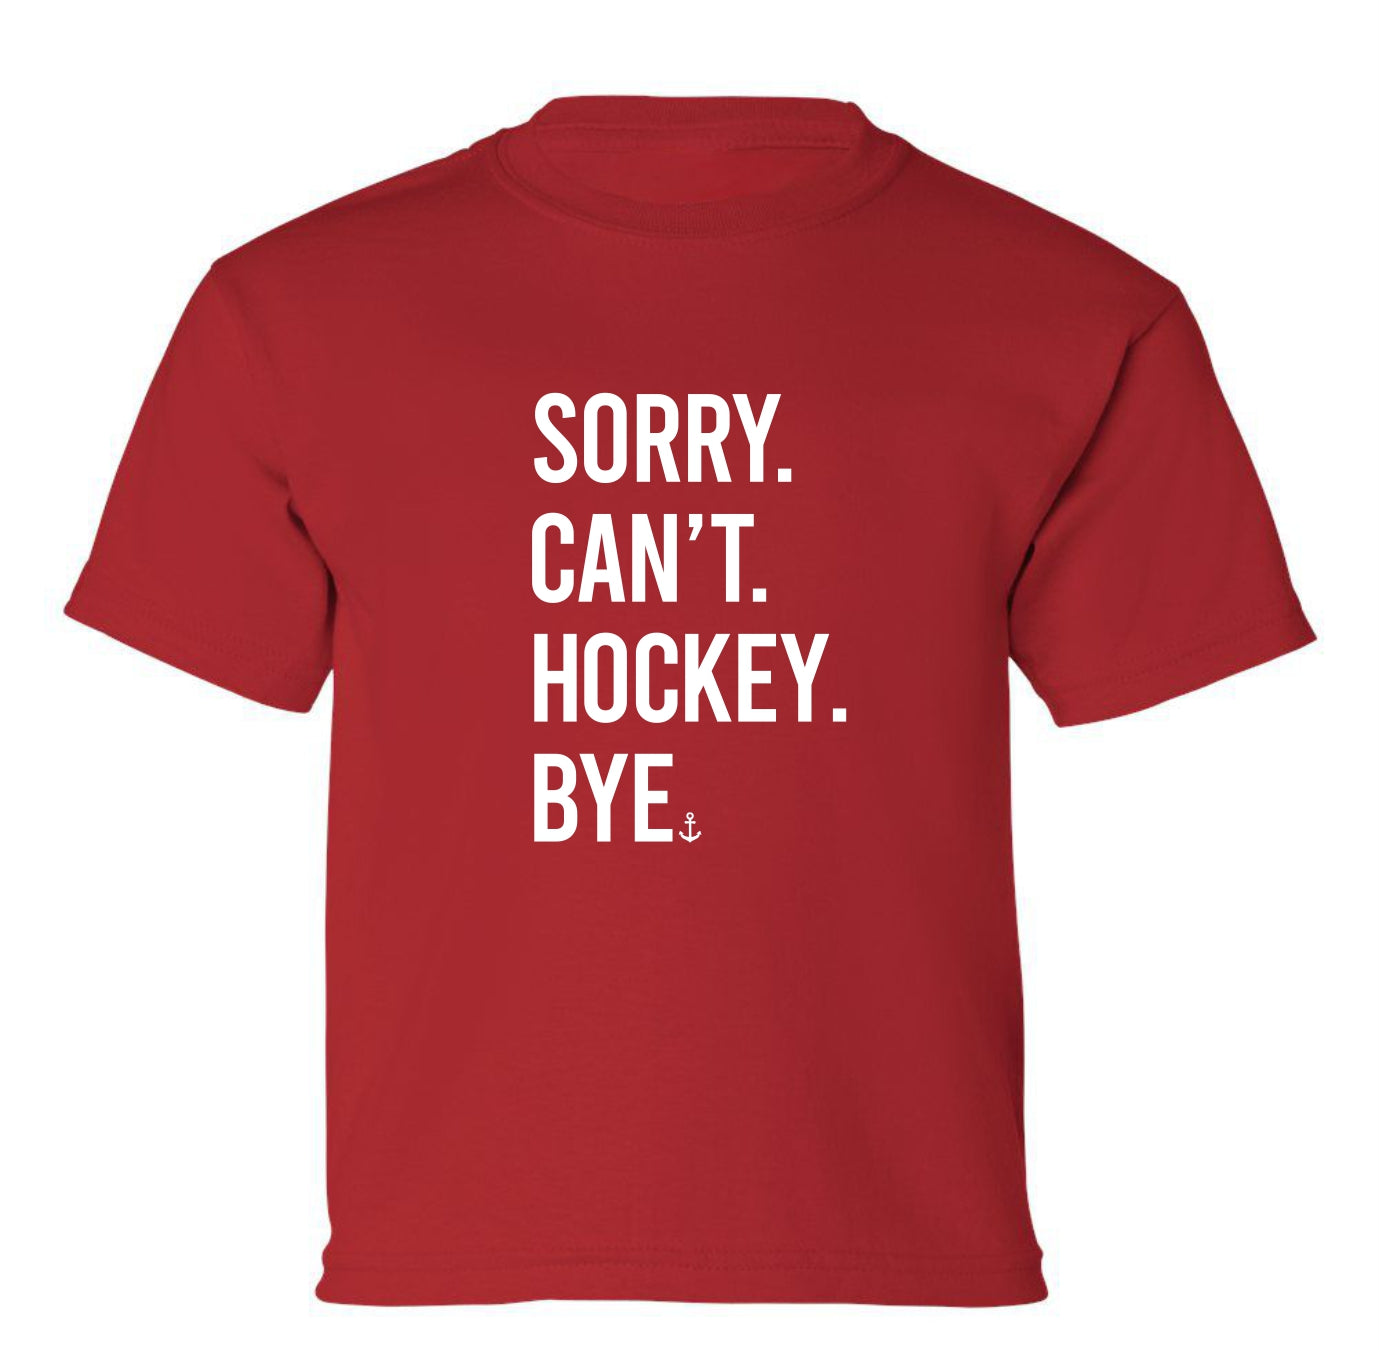 "Sorry. Can't. Hockey. Bye." Toddler/Youth T-Shirt